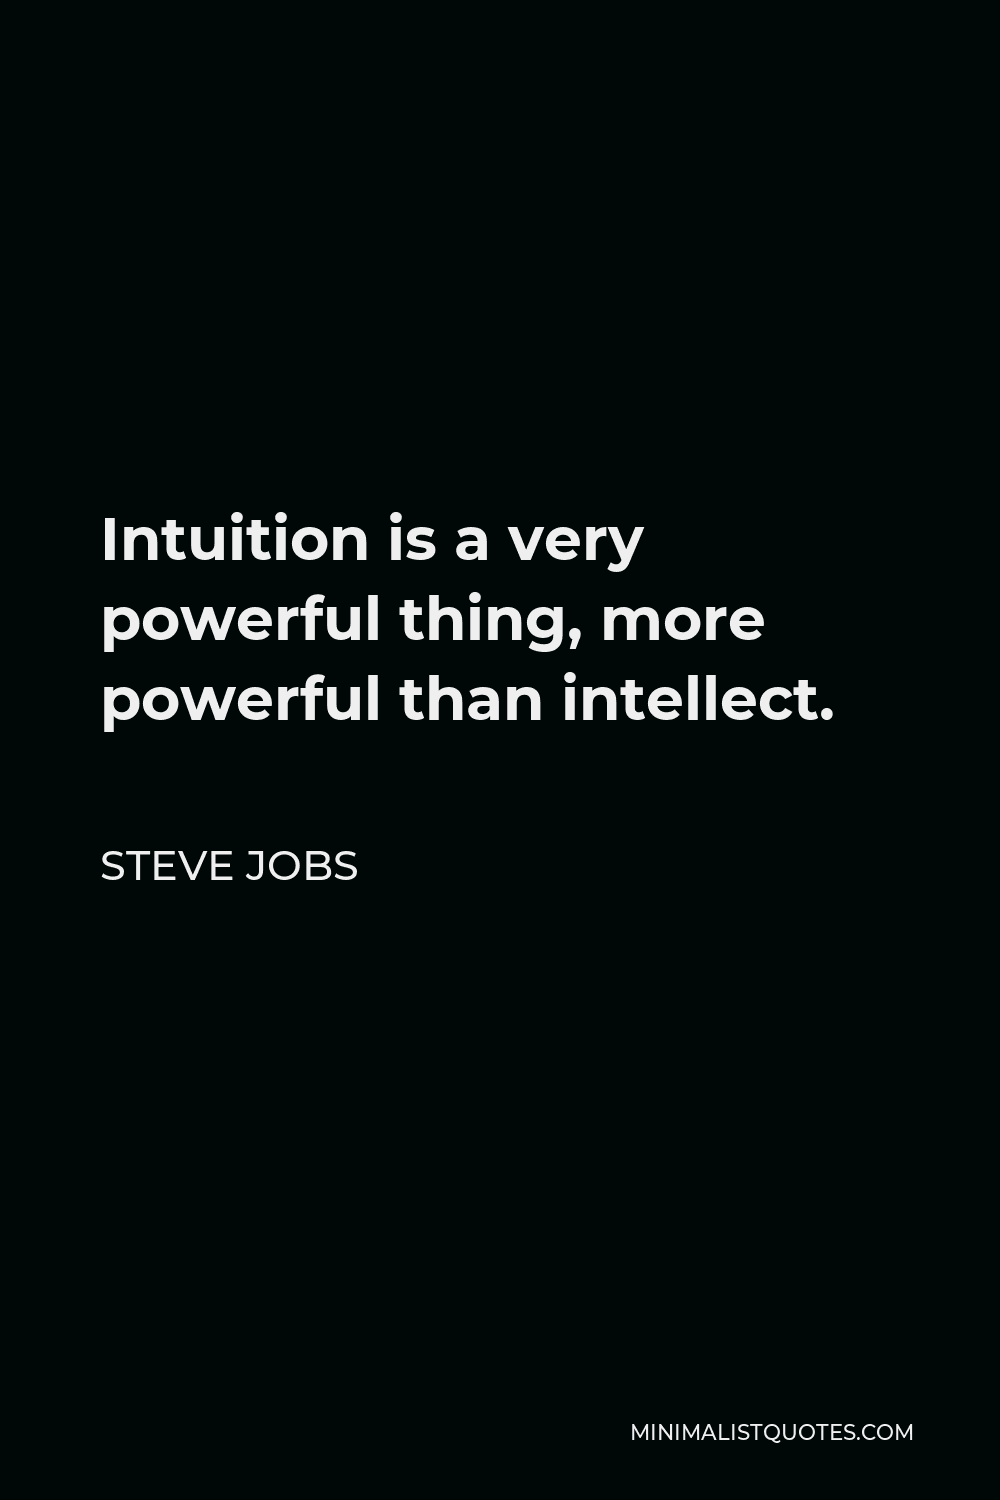 Steve Jobs Quote - Intuition is a very powerful thing, more powerful than intellect.